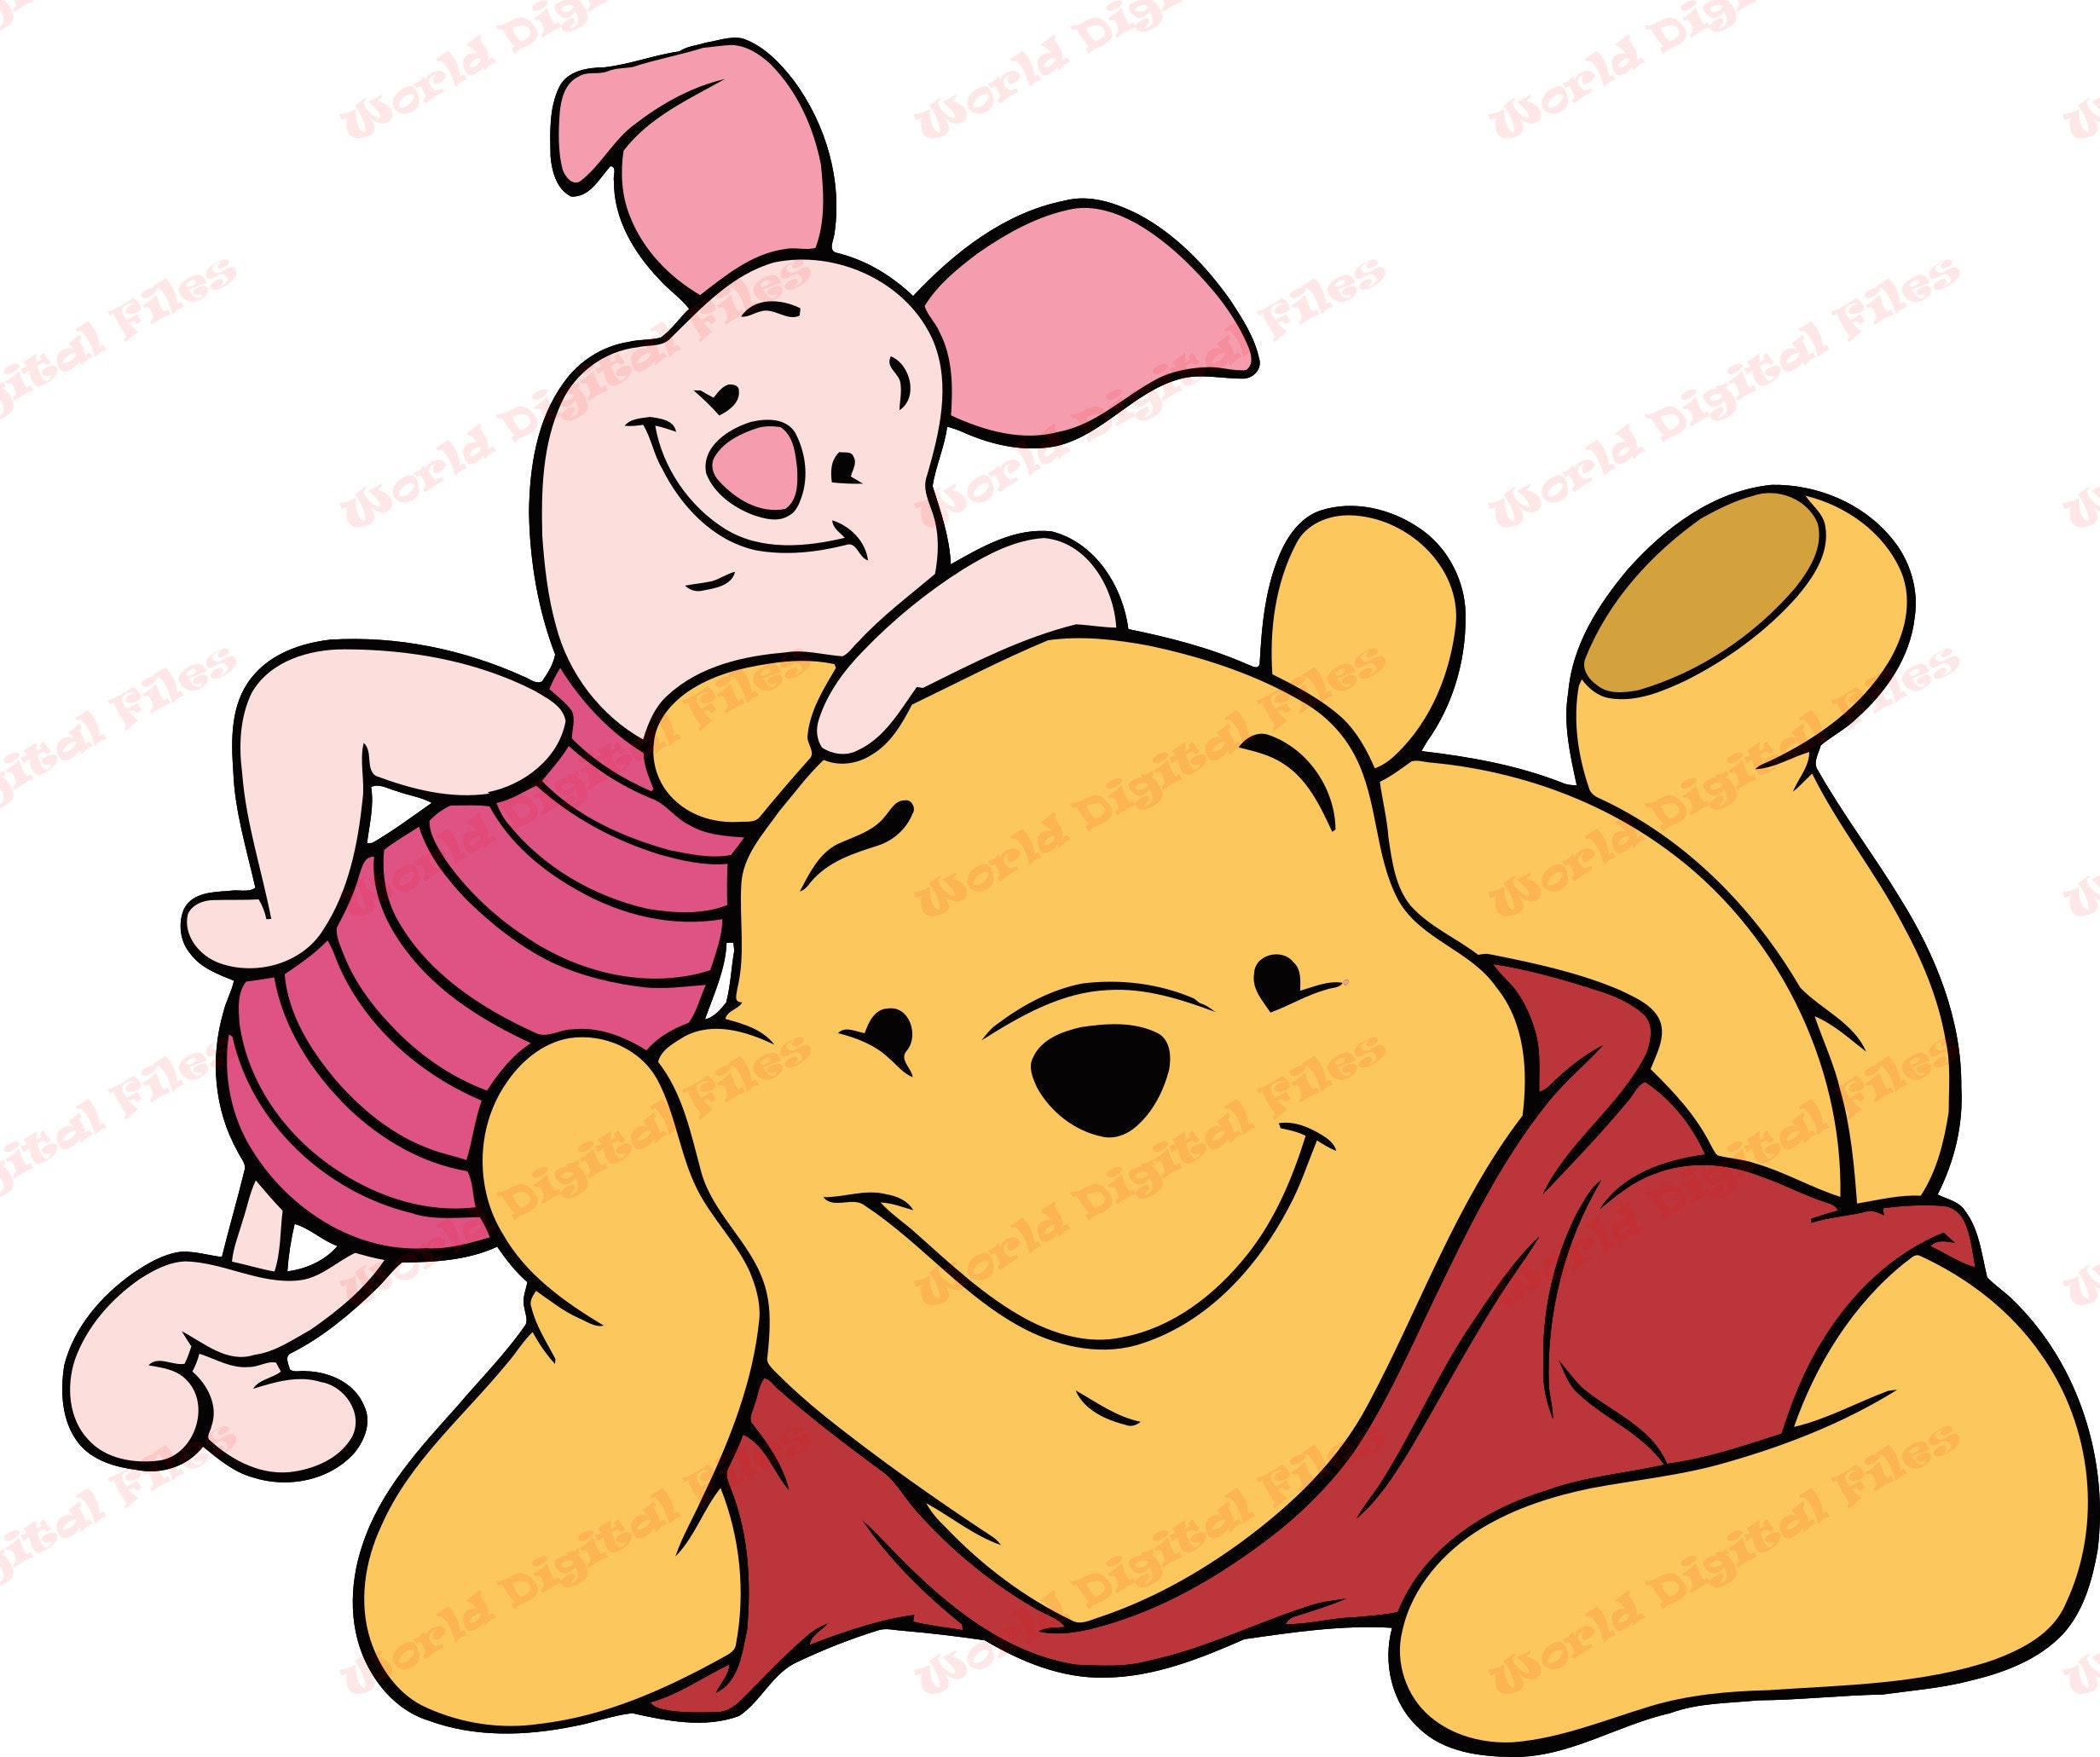 Winnie The Pooh And Piglet SVG 1 svg dxf Cricut Silhouette | Etsy